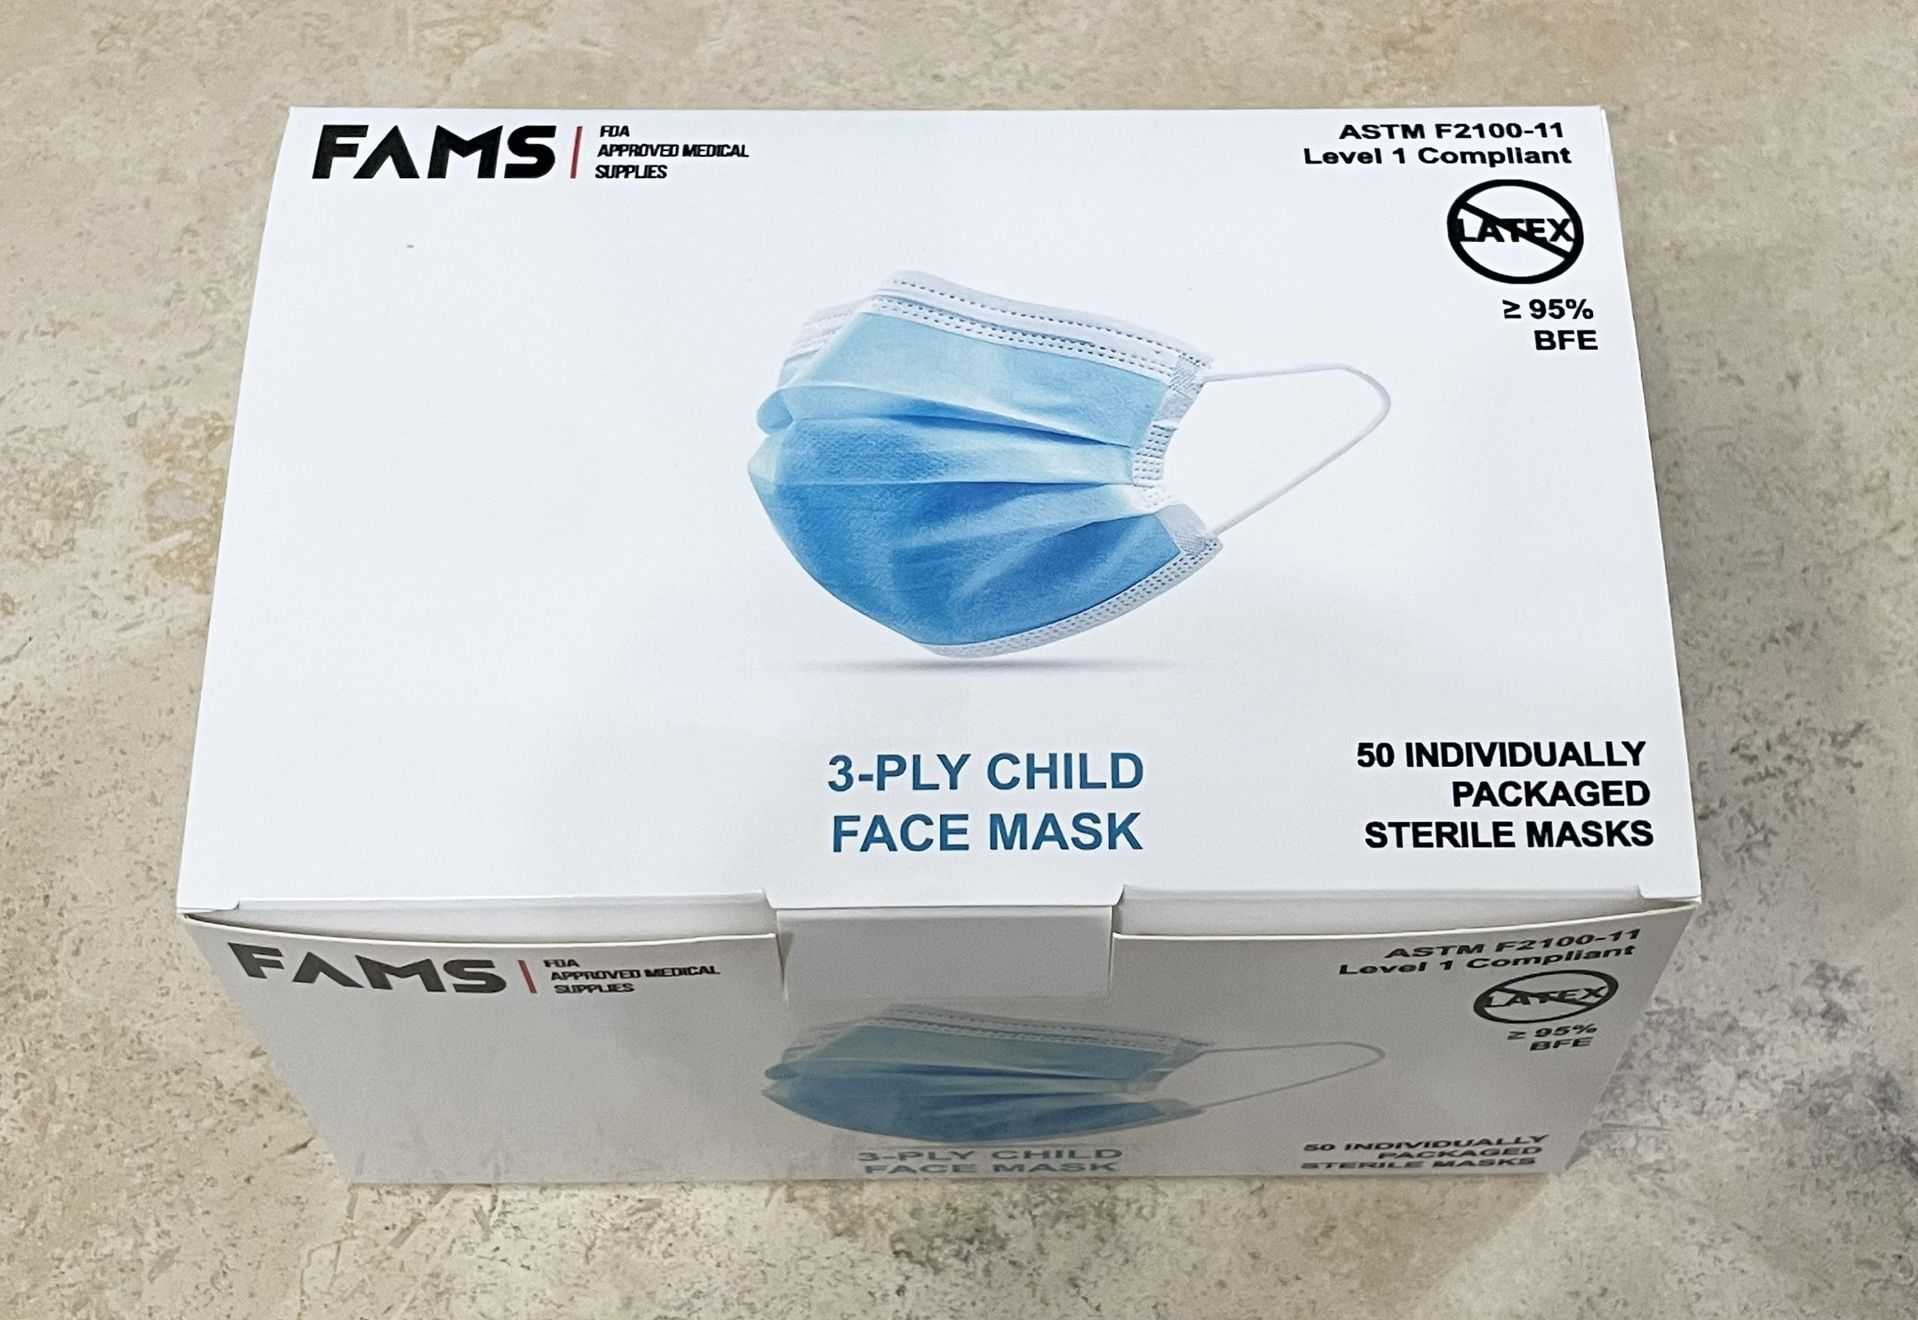 Child Individually Packaged Sterile Face Masks